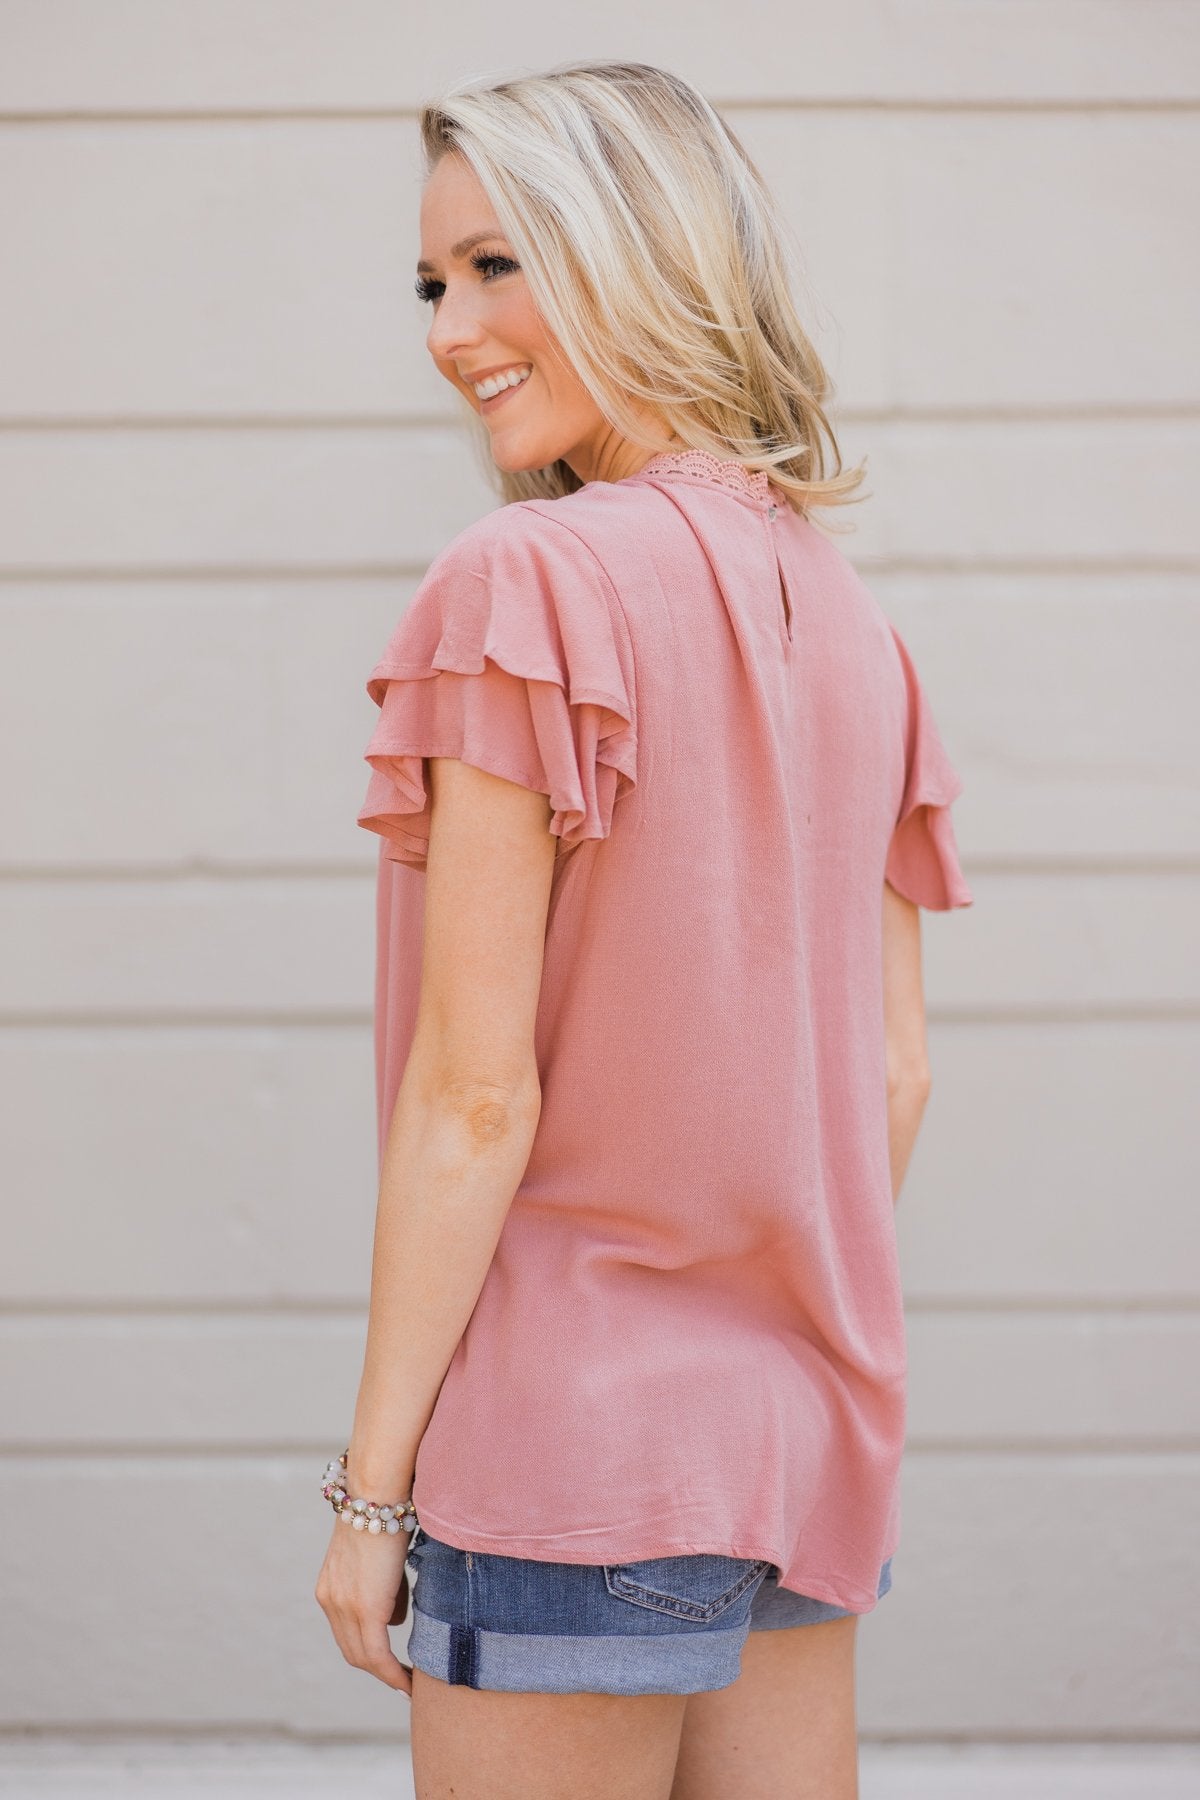 Sweet Summer Time Top- Dusty Rose